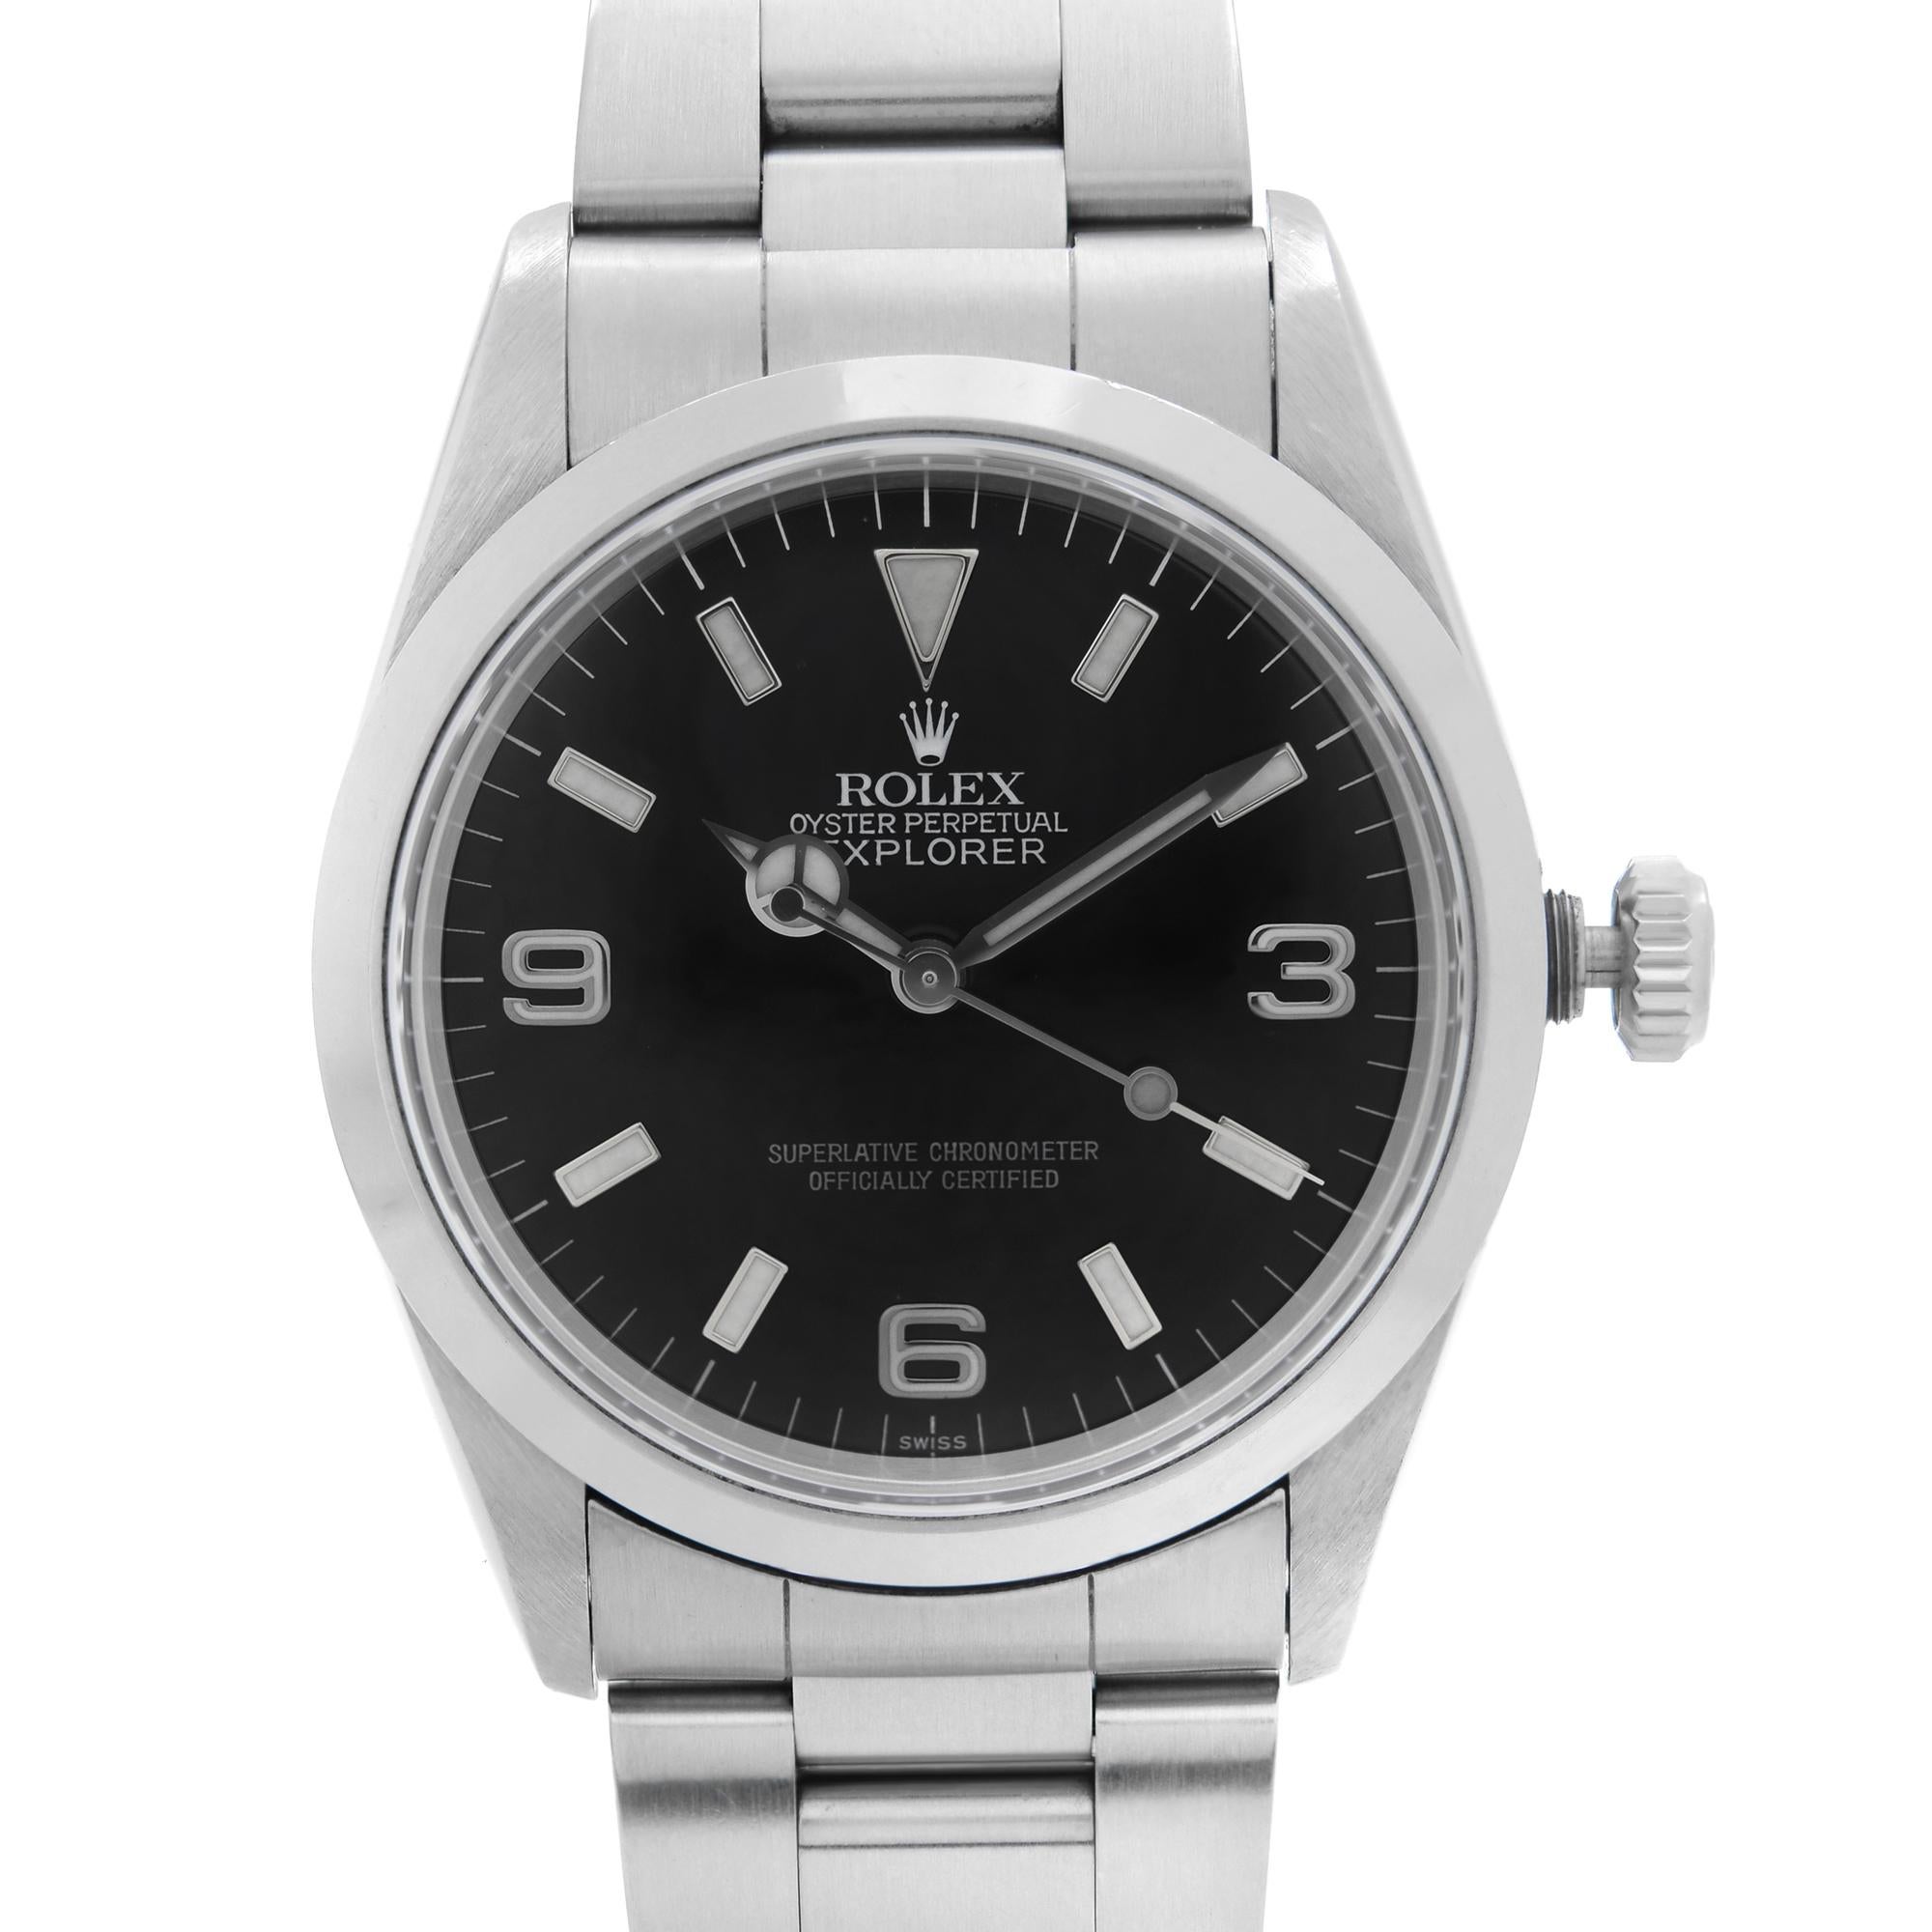 Pre Owned Rolex Explorer 36mm Stainless Steel Black Dial Automatic Men's Watch 14270. The minor patina on the dial near the center of the hands around canon pinion. This Timepiece was Produced in 1997 and is Powered by Mechanical (Automatic)